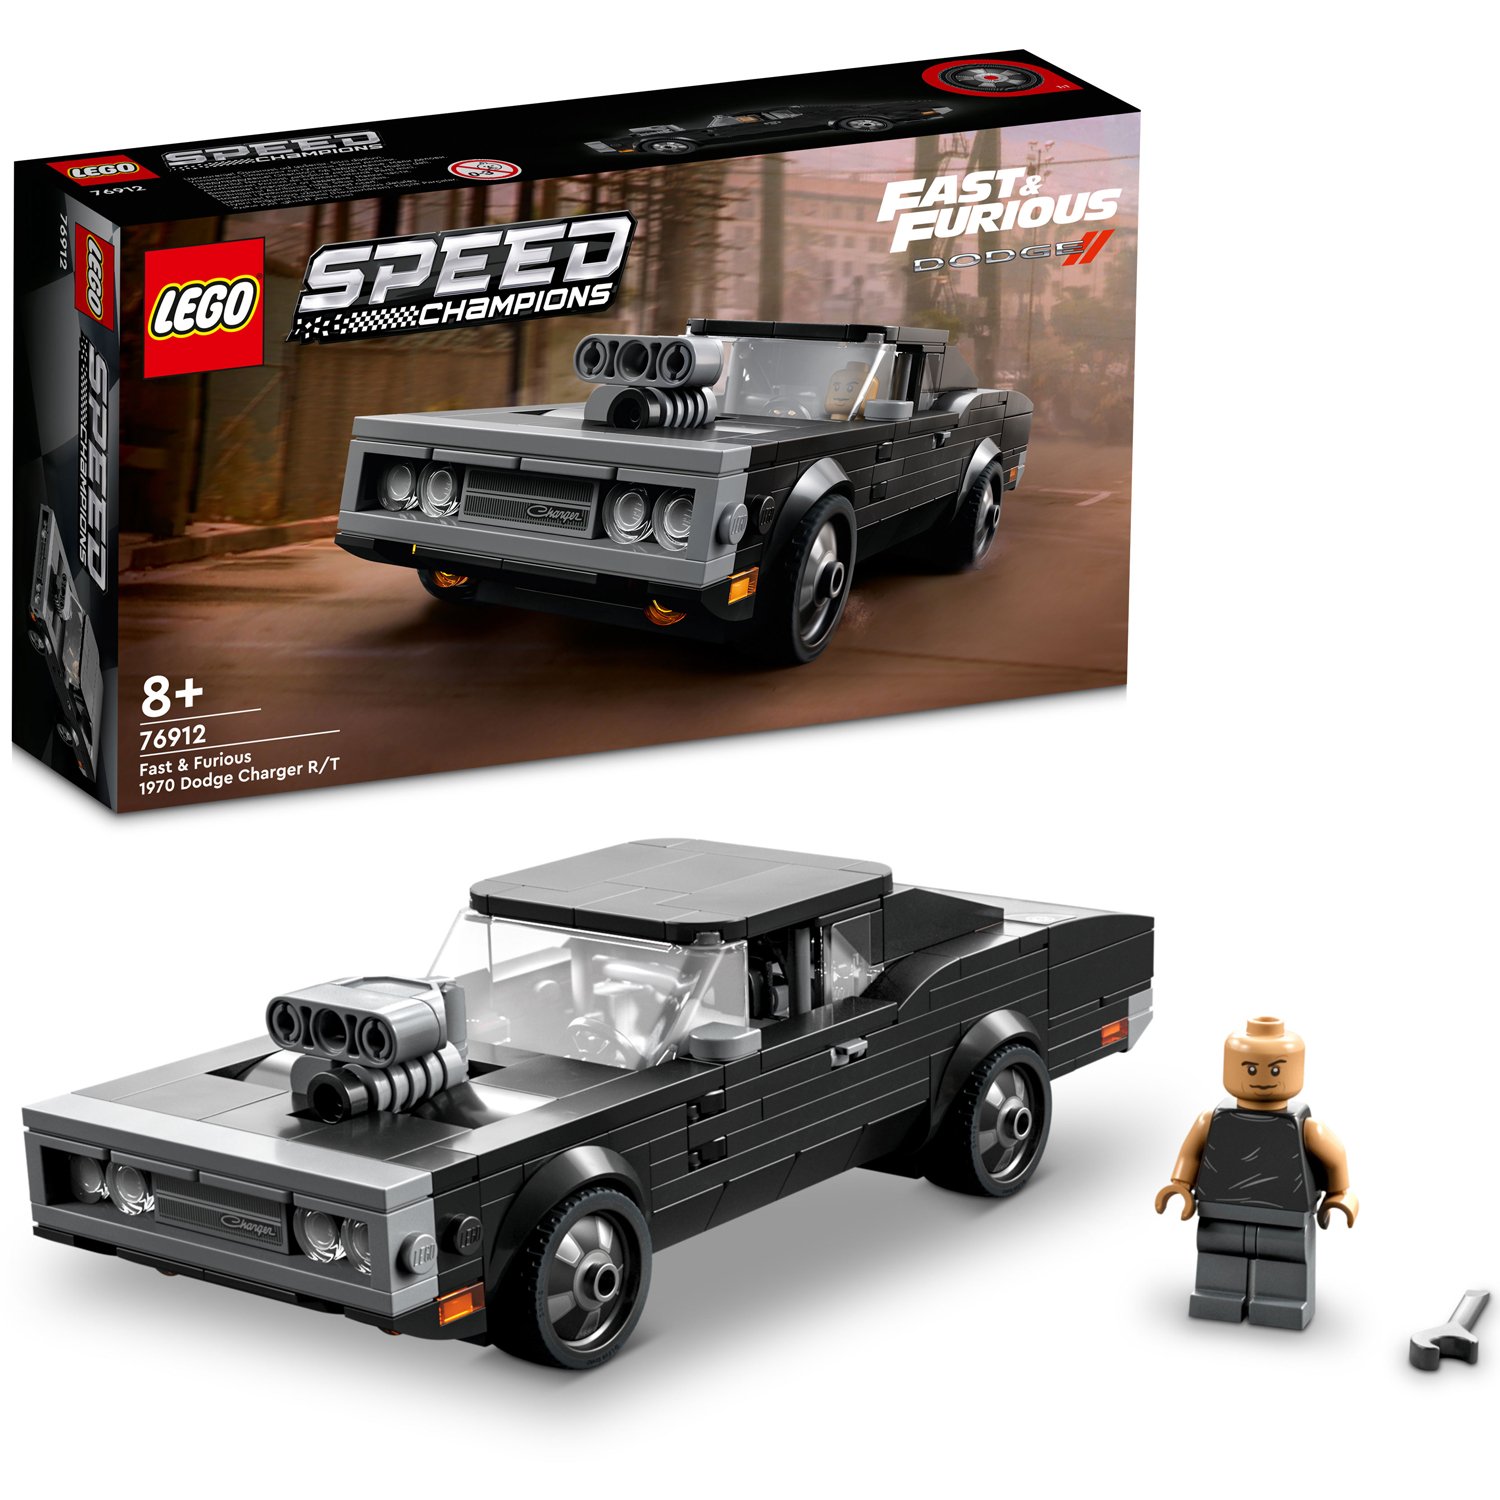 LEGO Speed Champions - Fast & Furious 1970 Dodge